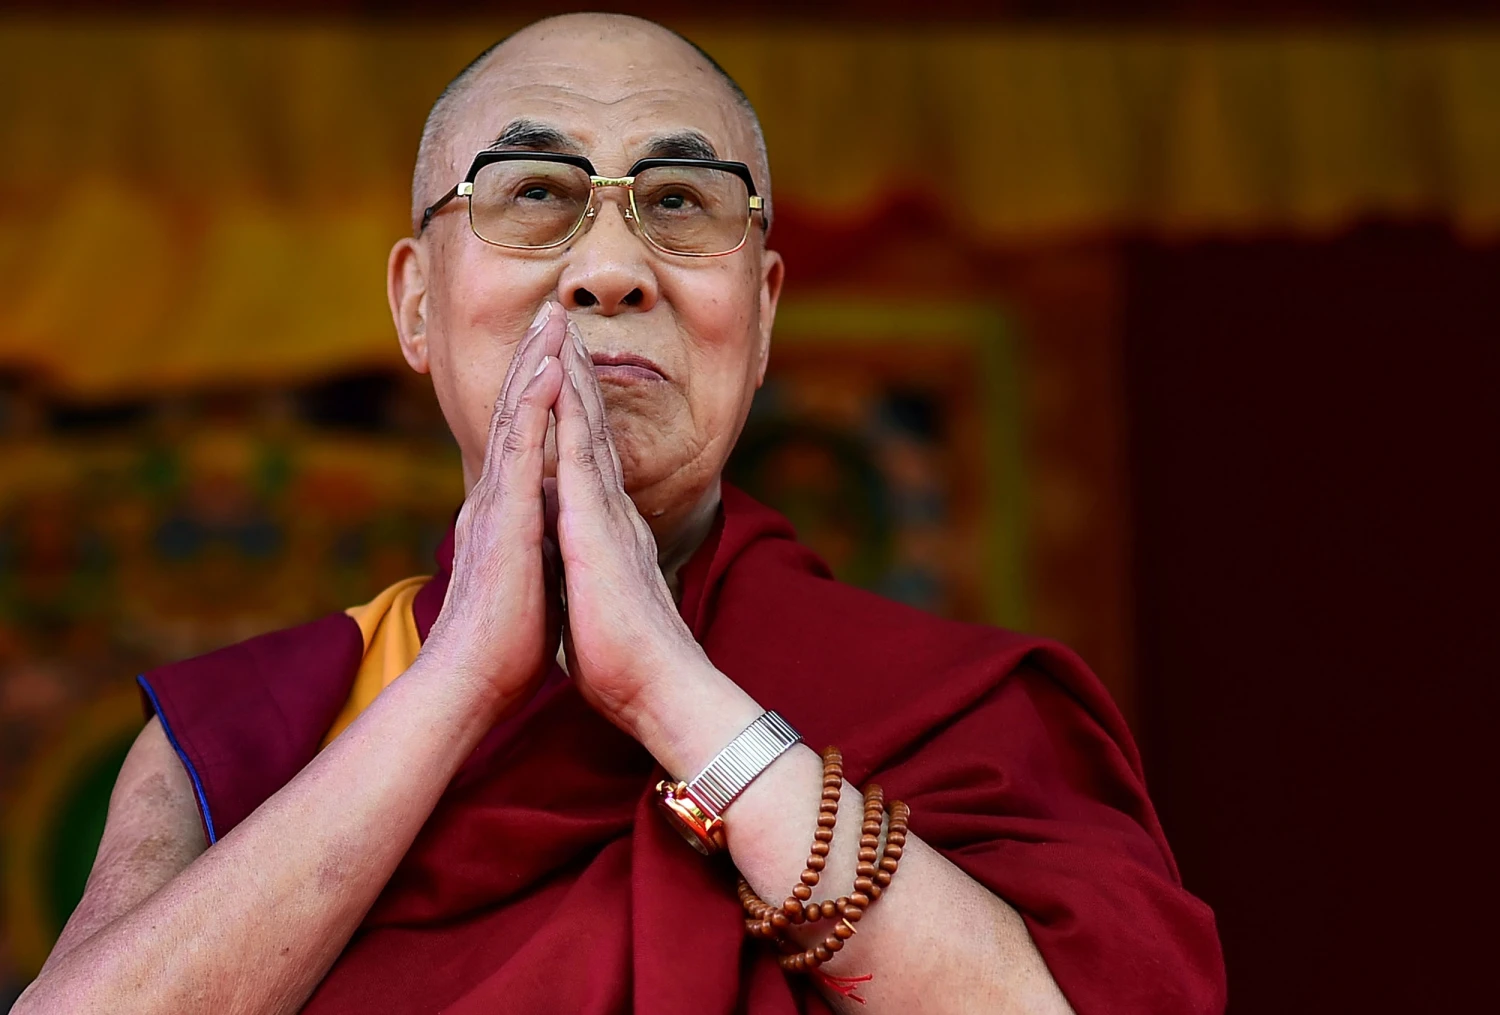 dalai-lama-apologizes-for-inappropriate-behavior-regrets-asking-child-to-suck-my-tongue